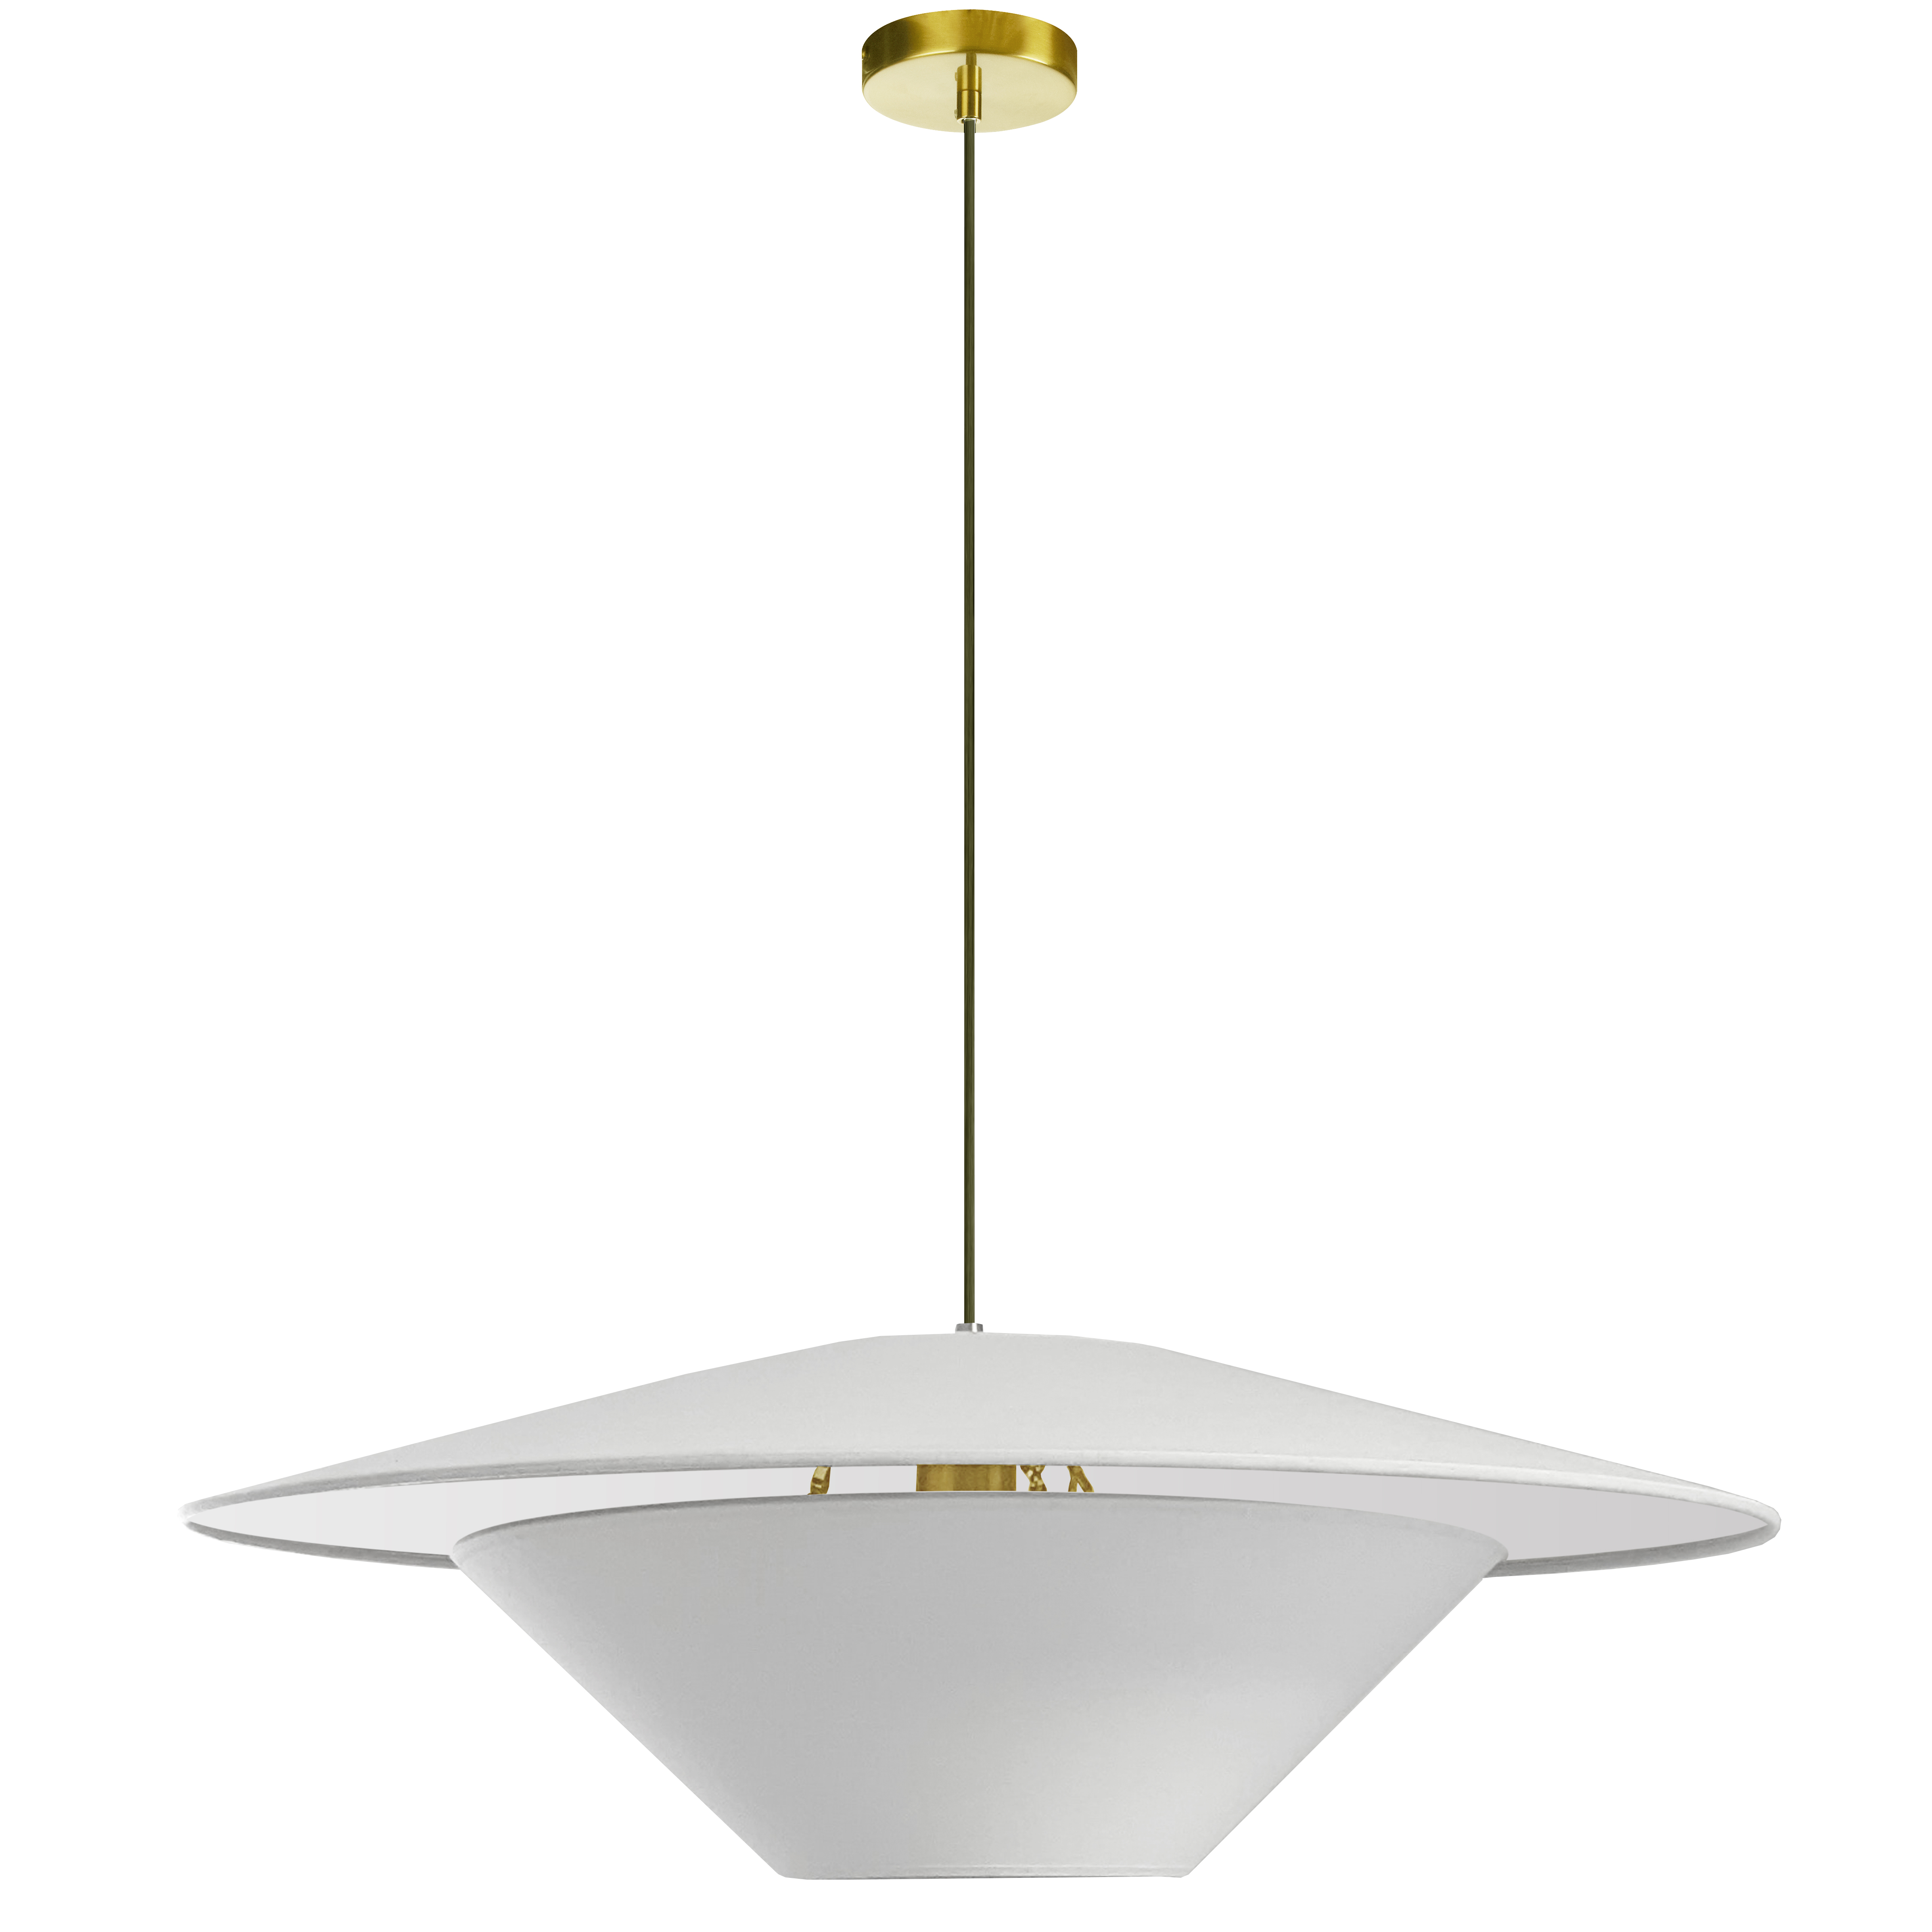 The Poseidon family of lighting features an uncommonly stylish two tier design. It creates a dimensional effect that draws attention while complementing your fashionable modern furnishings. The metal frame in your choice of finish is discrete, leaving the spotlight to the two tiered fabric shade, each tier constructed at a different angle for eye-catching style. Options include contrasting inner and outer finishes, for a variety of dramatic and chic looks. Poseidon lighting will add a noticeable pop of couture design in a foyer, dinette or office setting.